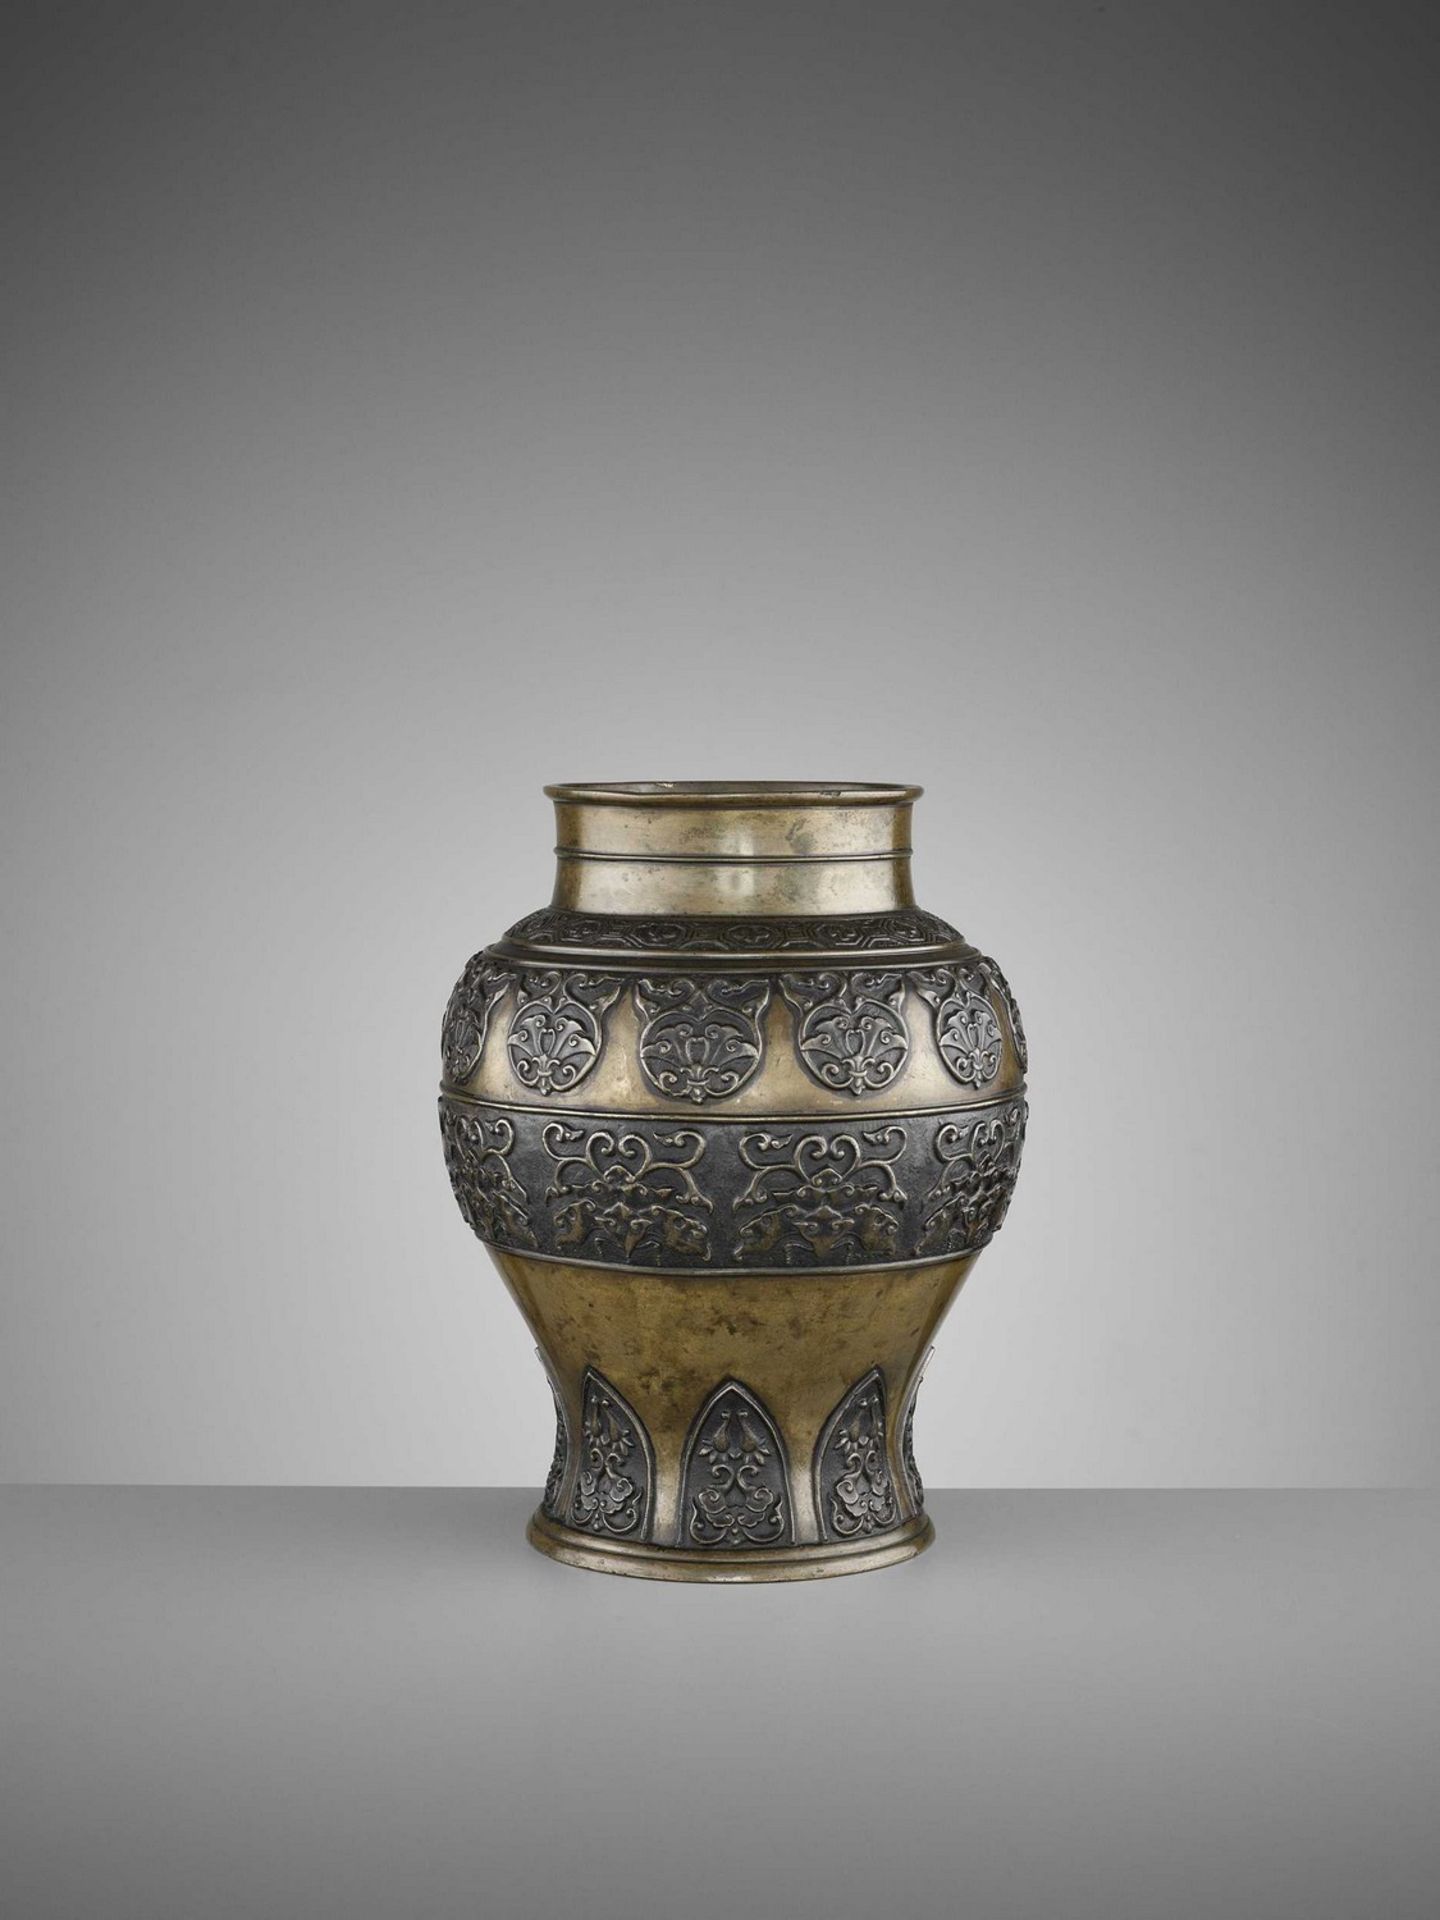 AN ARCHAISTIC BRONZE BALUSTER VASE, 17TH CENTURY - Image 5 of 8